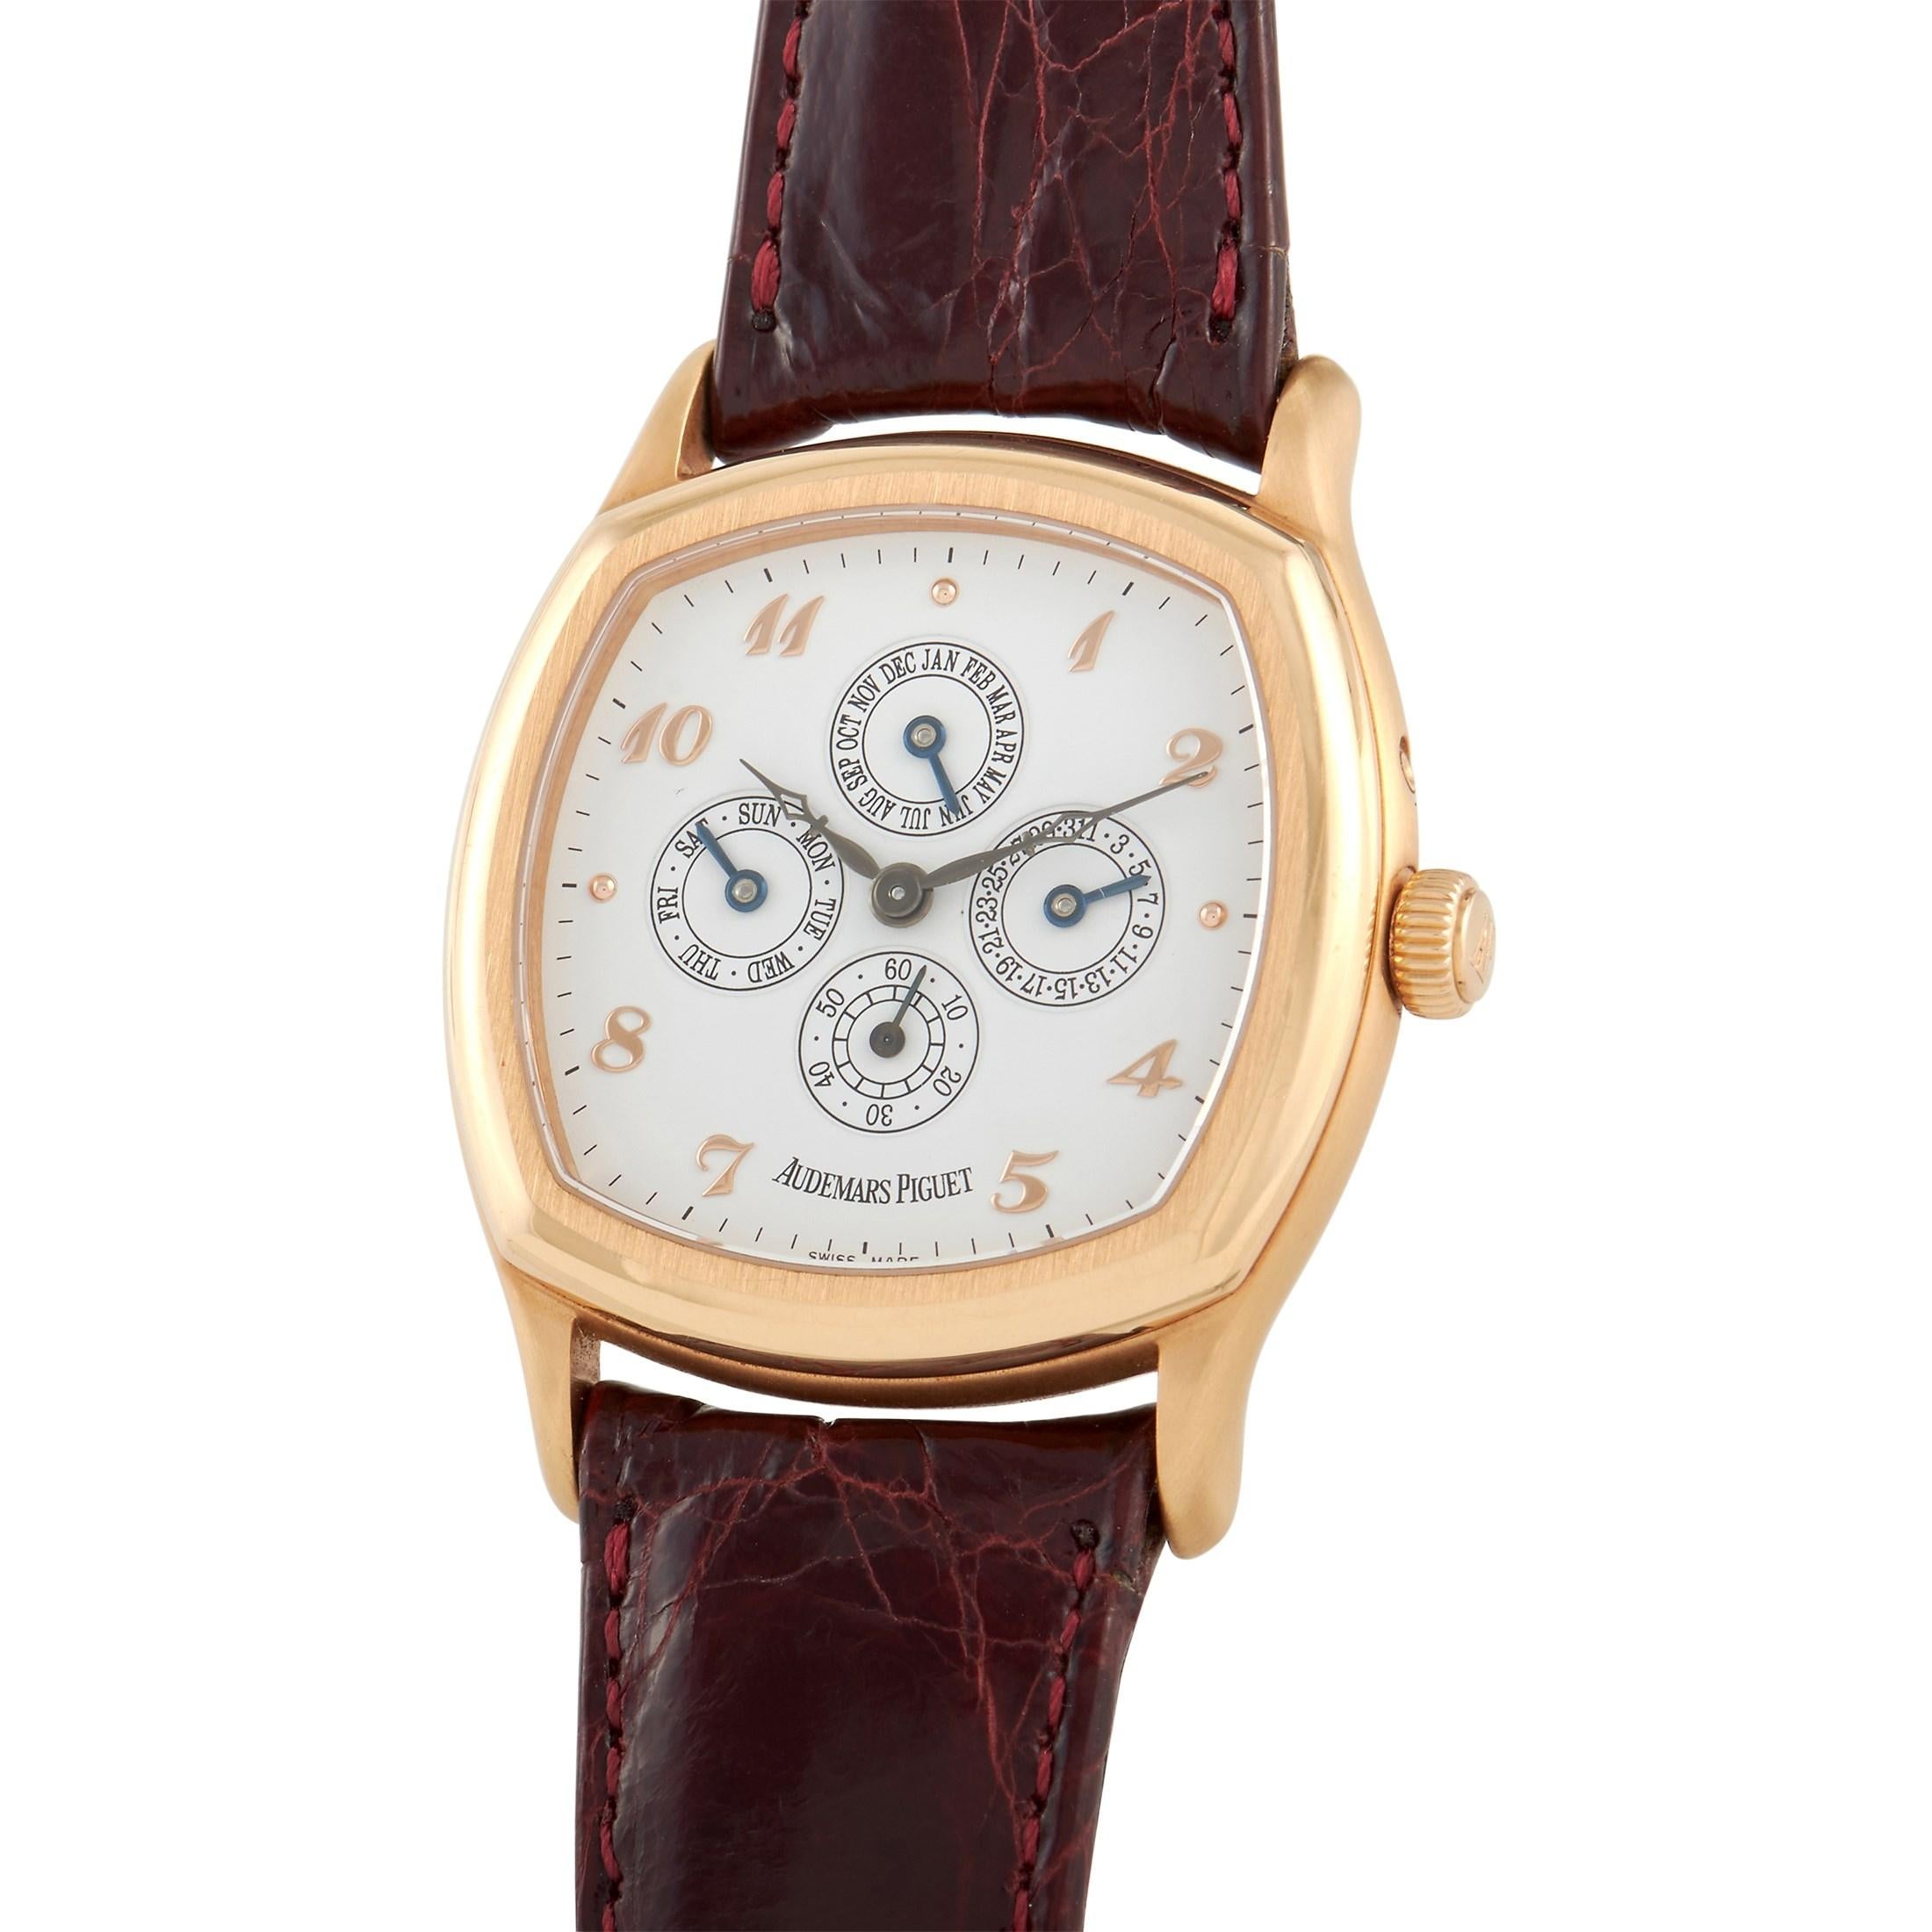 This Audemars Piguet watch, reference number 258700, is from the John Shaeffer line of watches from the 1990s. It’s an integral part of brand’s storied collection, which draws inspiration from American industrialist John Shaeffer. 

This watch